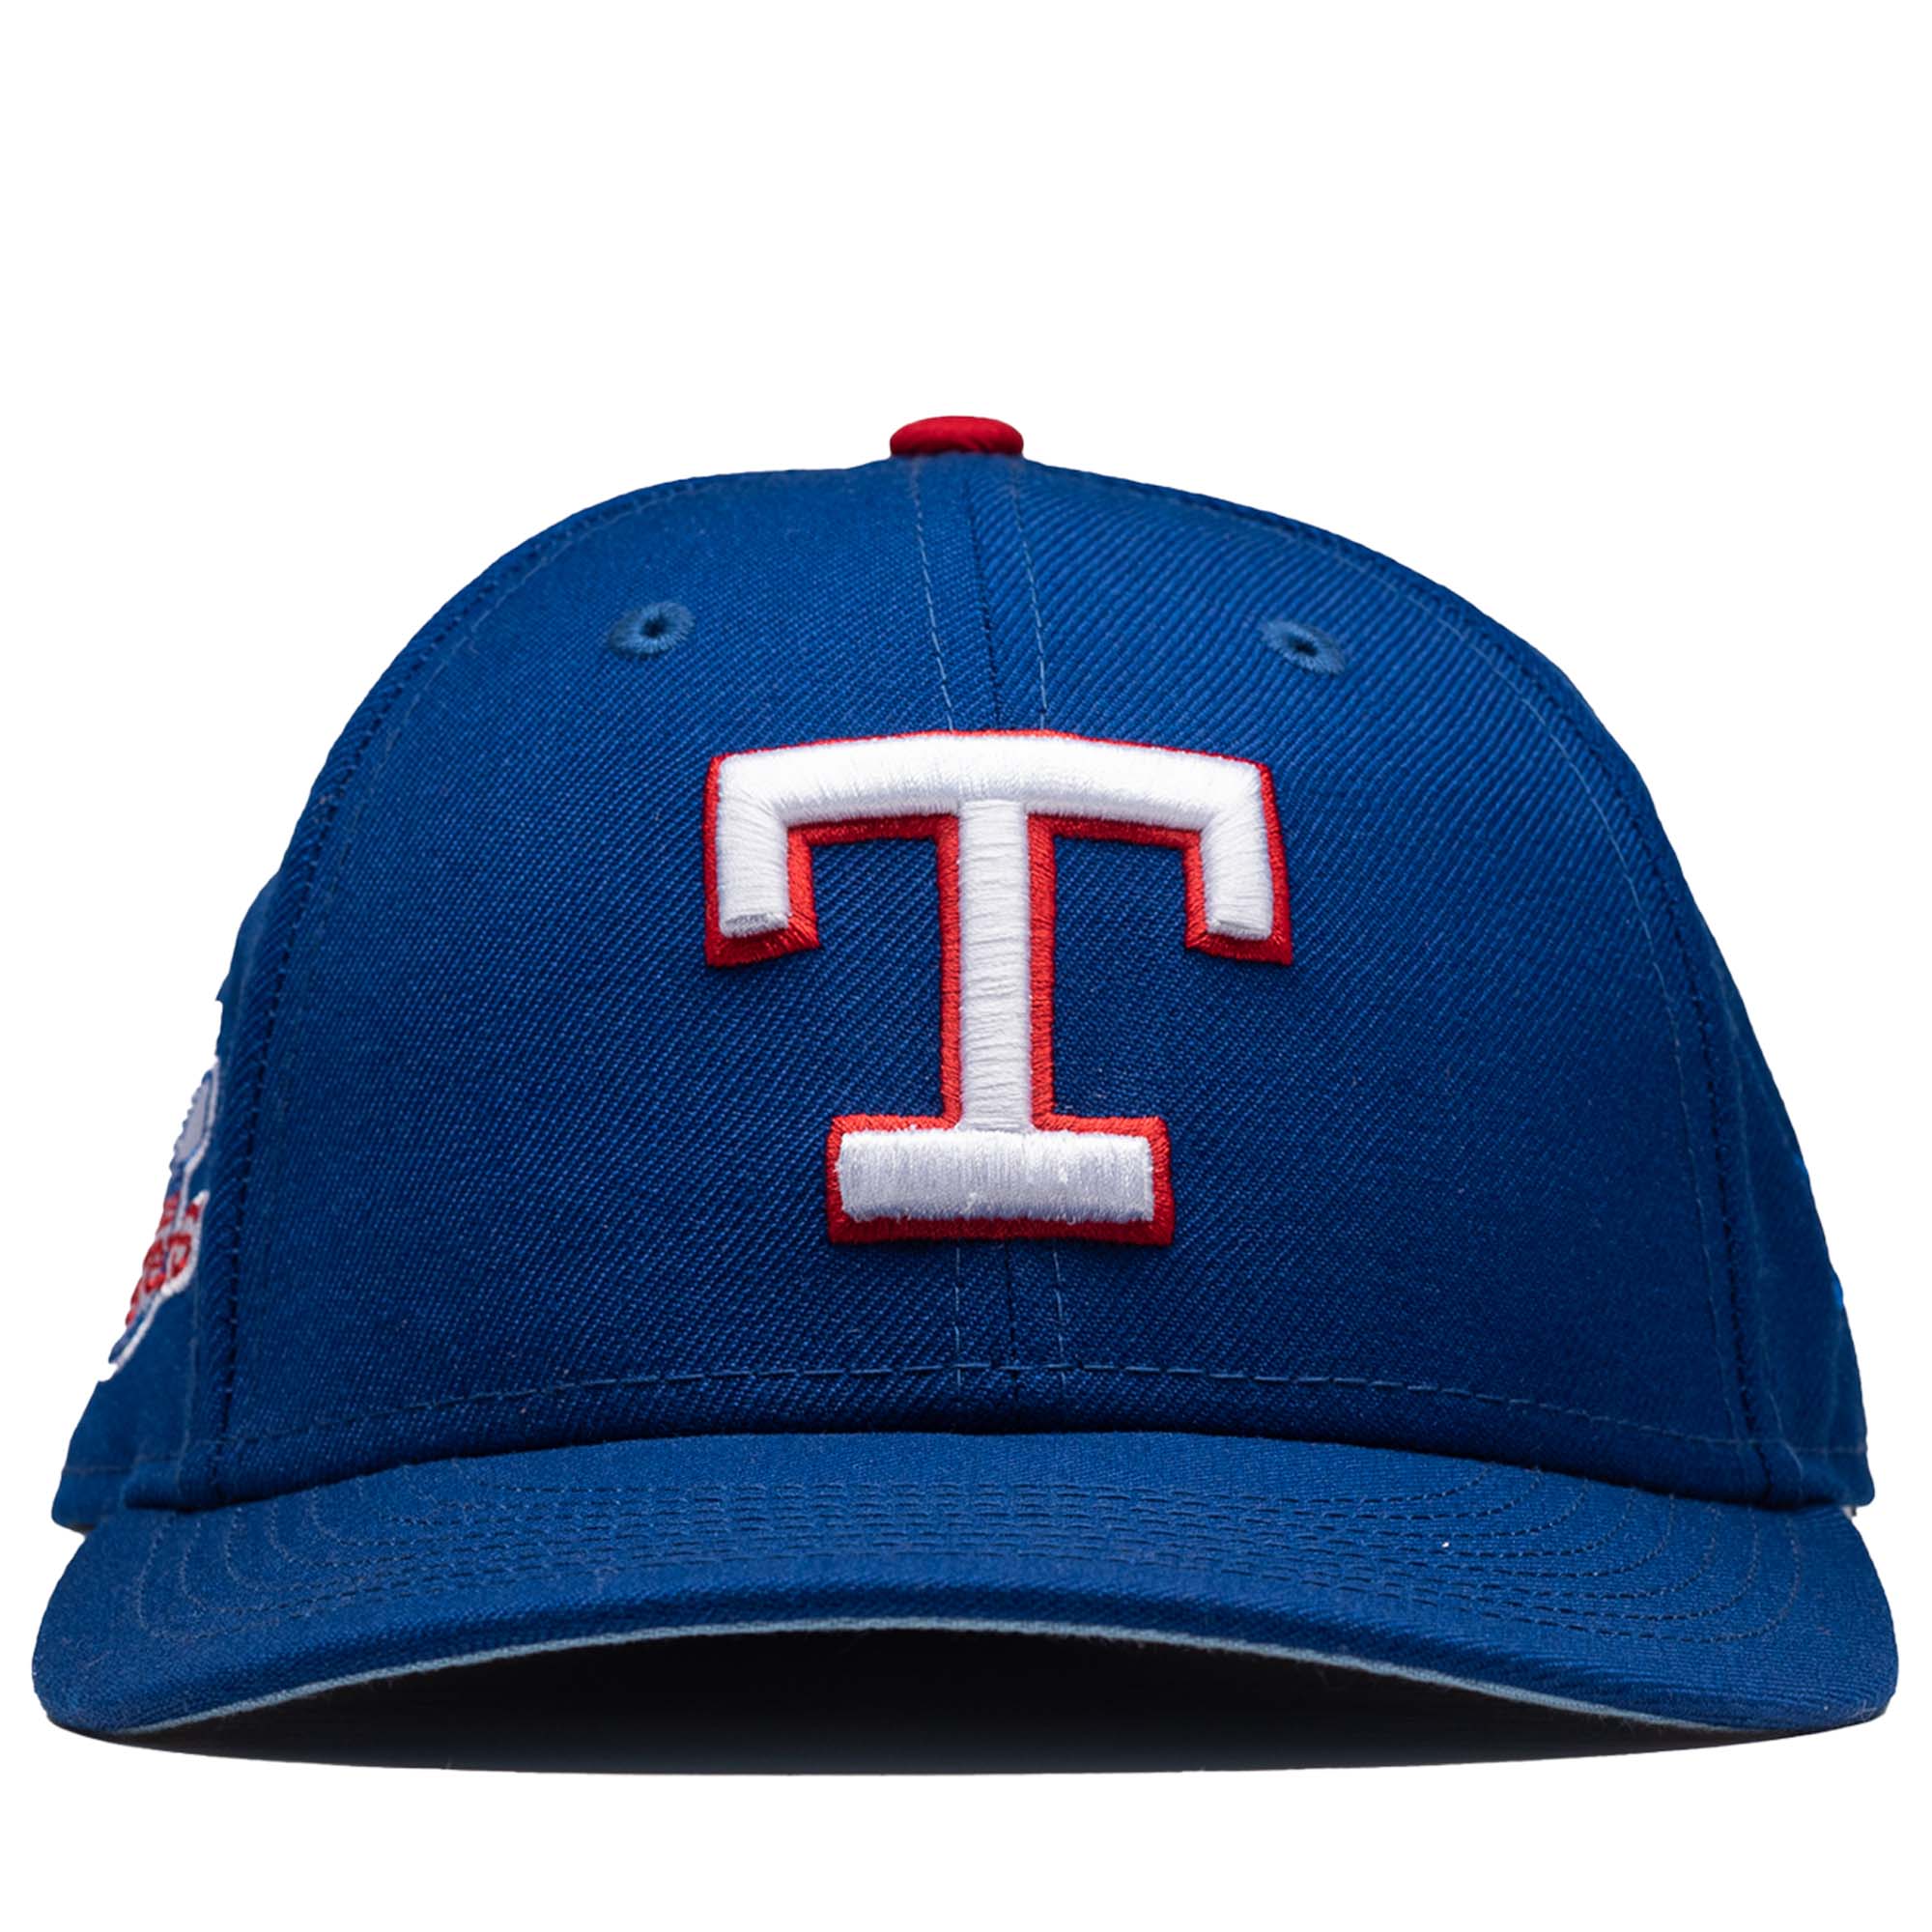 New Era Texas Rangers Fitted Hat Size 7 3/8 for Sale in San